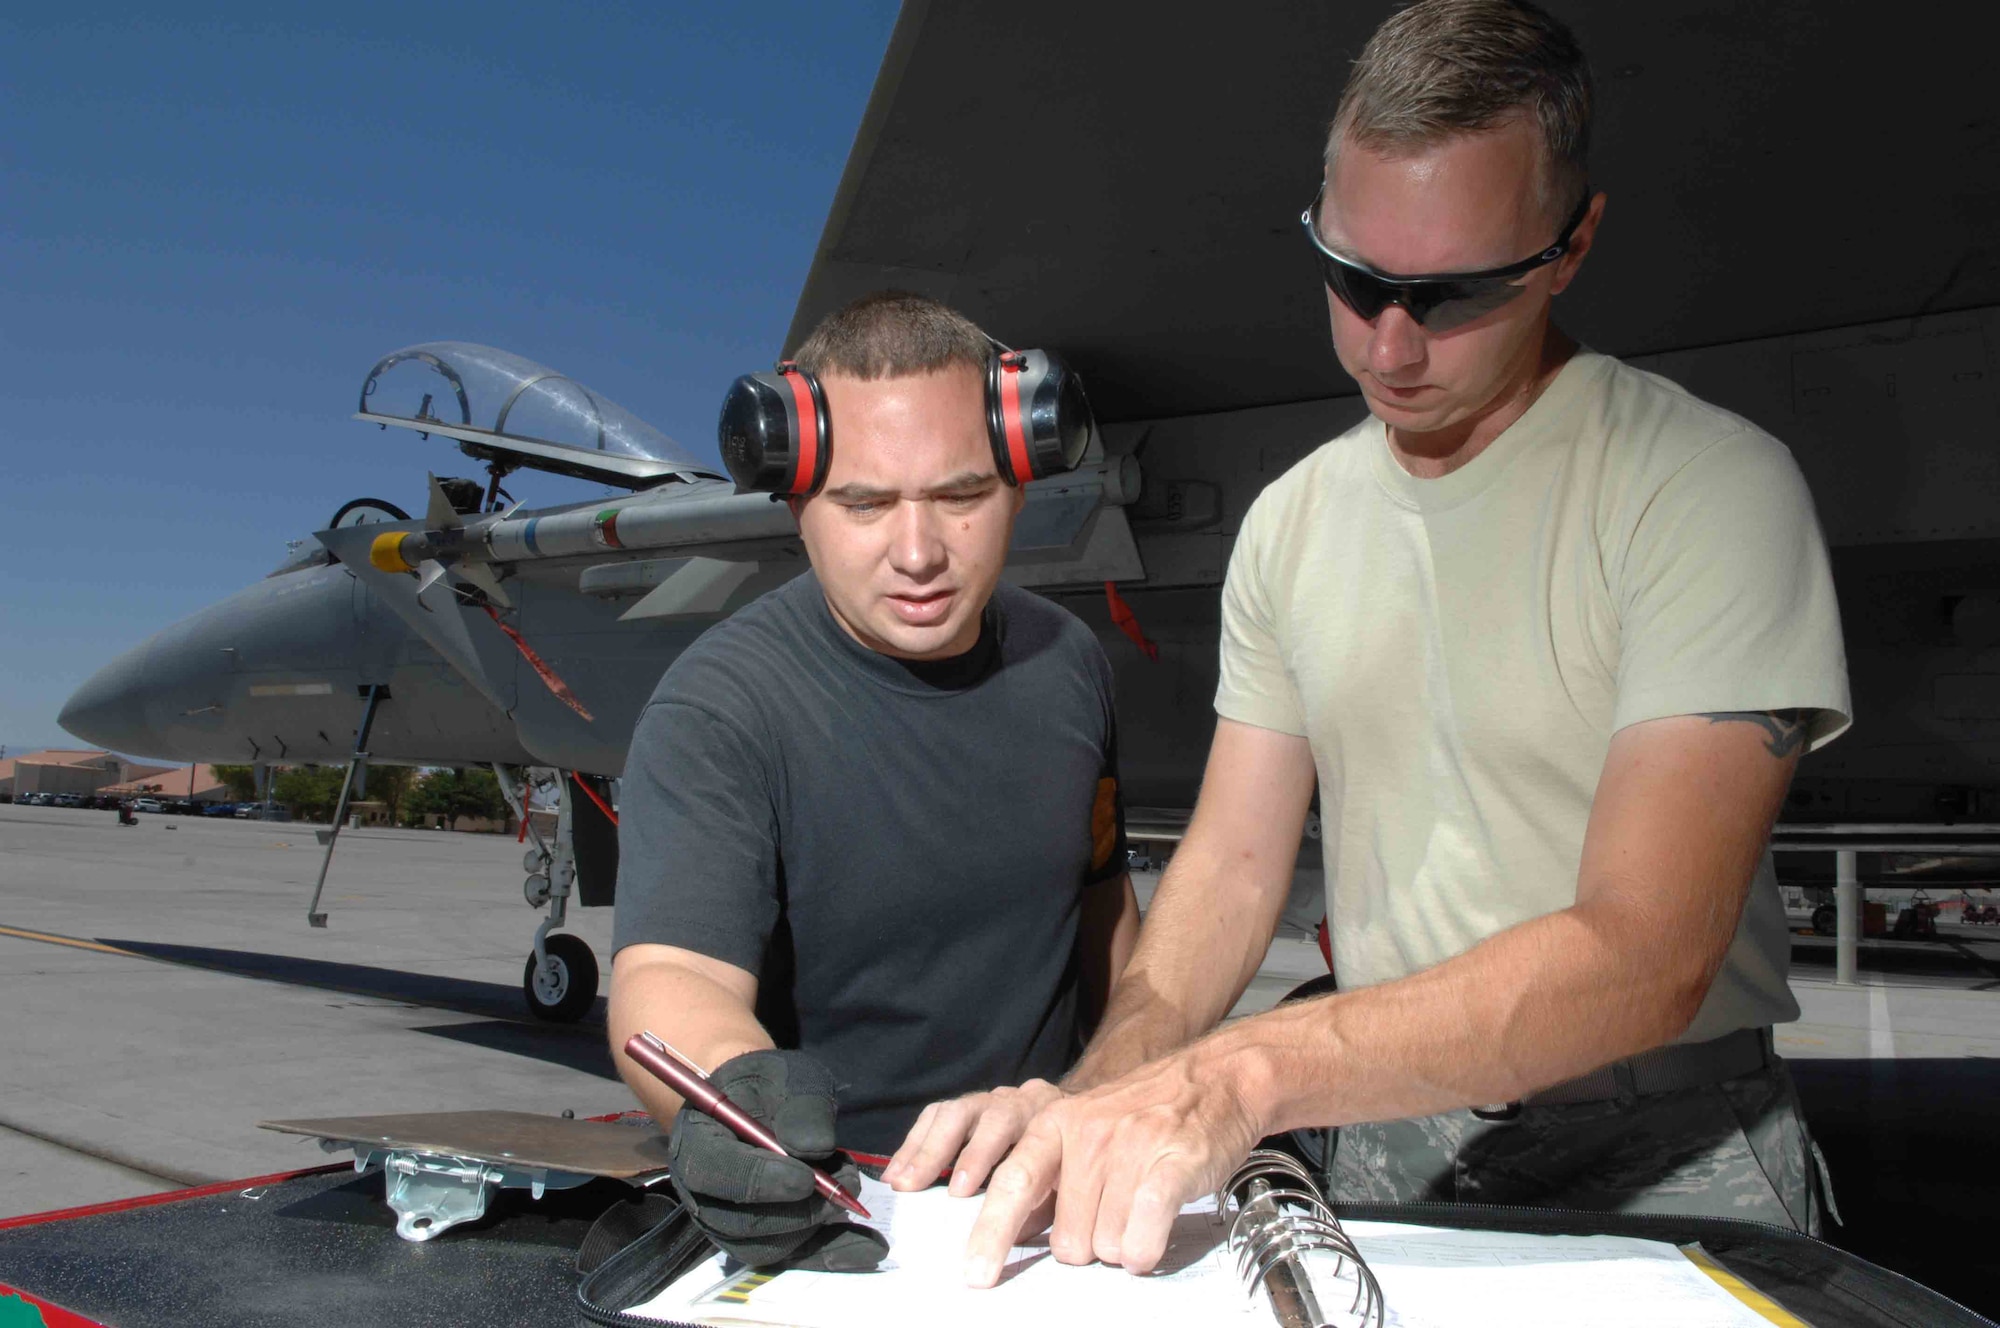 Staff Sgts. Richard Cordova (left), an F-15 weapons specialist in the 926th Group Detachment 2, and Michael Adams, an F-15 expediter in the 57th Aircraft Maintenance Squadron, sign off on a weapons second-look inspection July 24, 2008, at Nellis Air Force Base, Nev. The 926th Group is an Air Force Reserve classic associate unit to the U.S. Air Force Warfare Center at Nellis AFB. Through Total Force Integration, reservists like Sergeant Cordova integrate with Airmen in the Regular Air Force to accomplish the USAFWC's mission. (U.S. Air Force photo/Senior Airman Larry E. Reid Jr.)